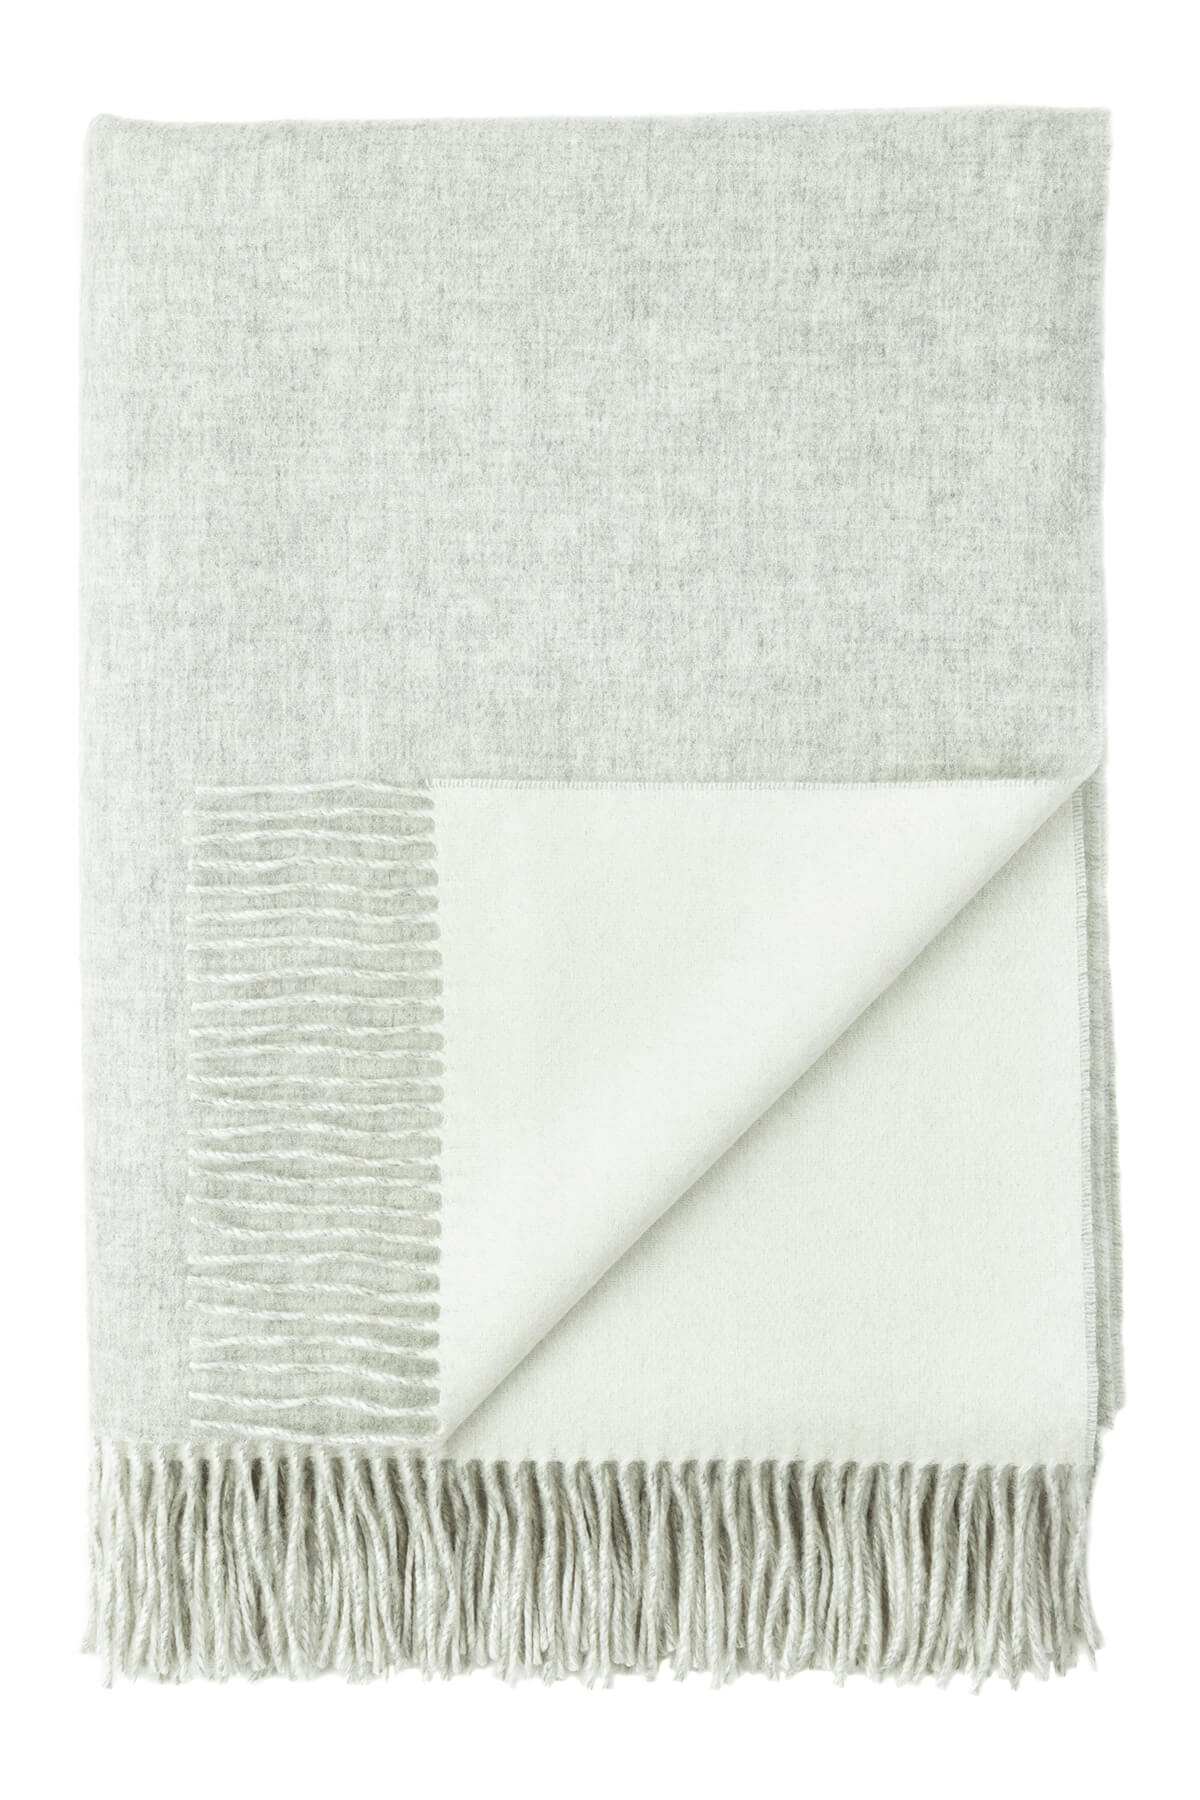 Plain Reversible Cashmere Bed Throw